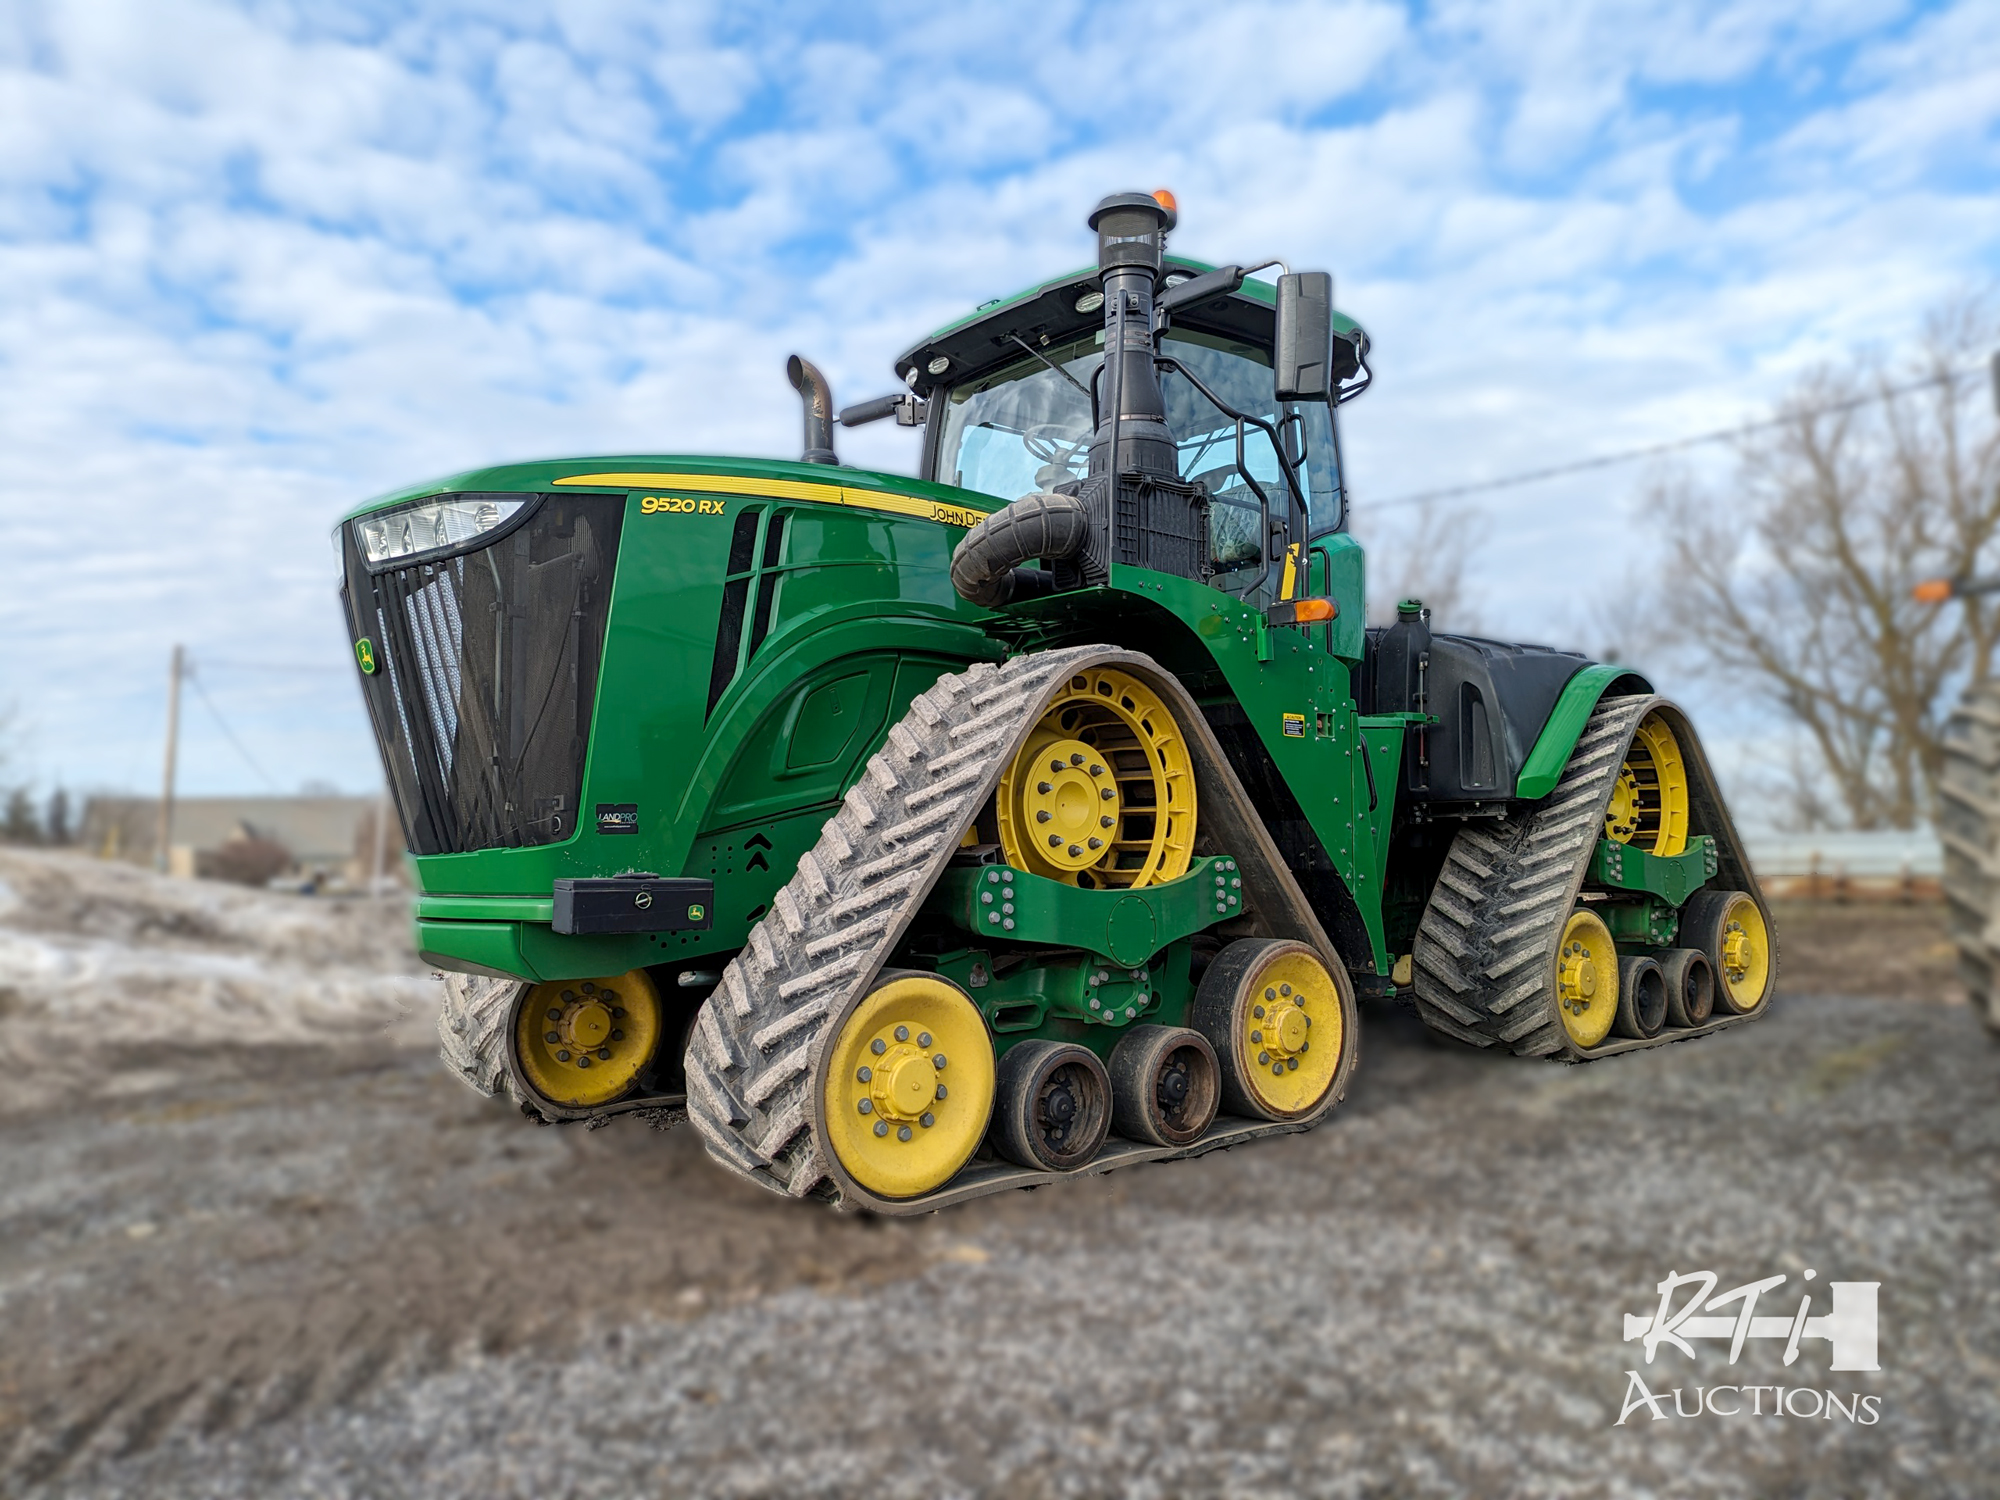 Kreher Farms Online Only Auction of Farm Tractors, Hay, Tillage and General Farm Tools Used in the Organic Farm Operations